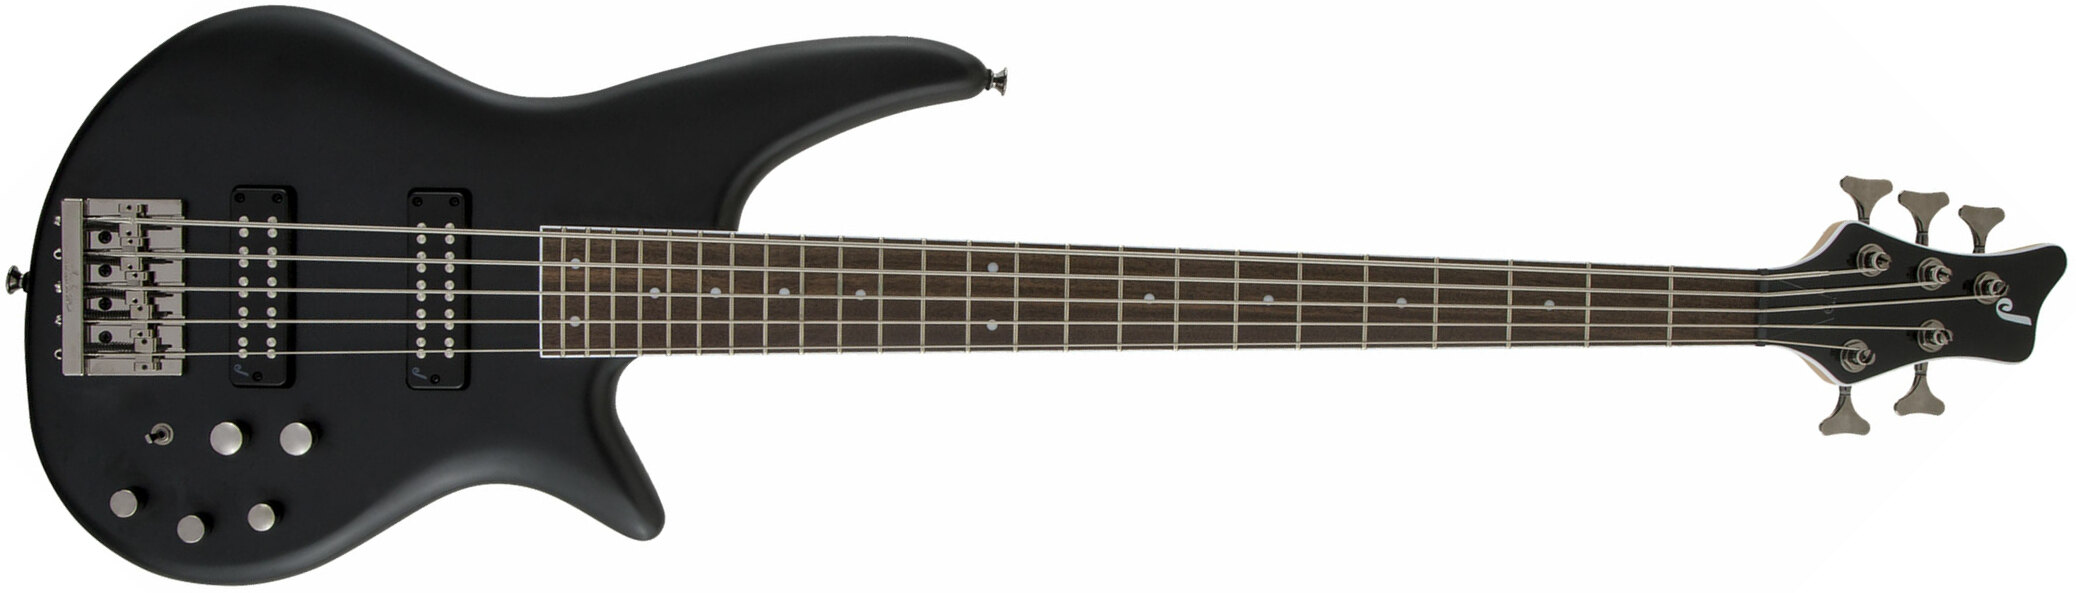 Jackson Spectra Bass Js3v 5c Active Lau - Satin Black - Solid body electric bass - Main picture